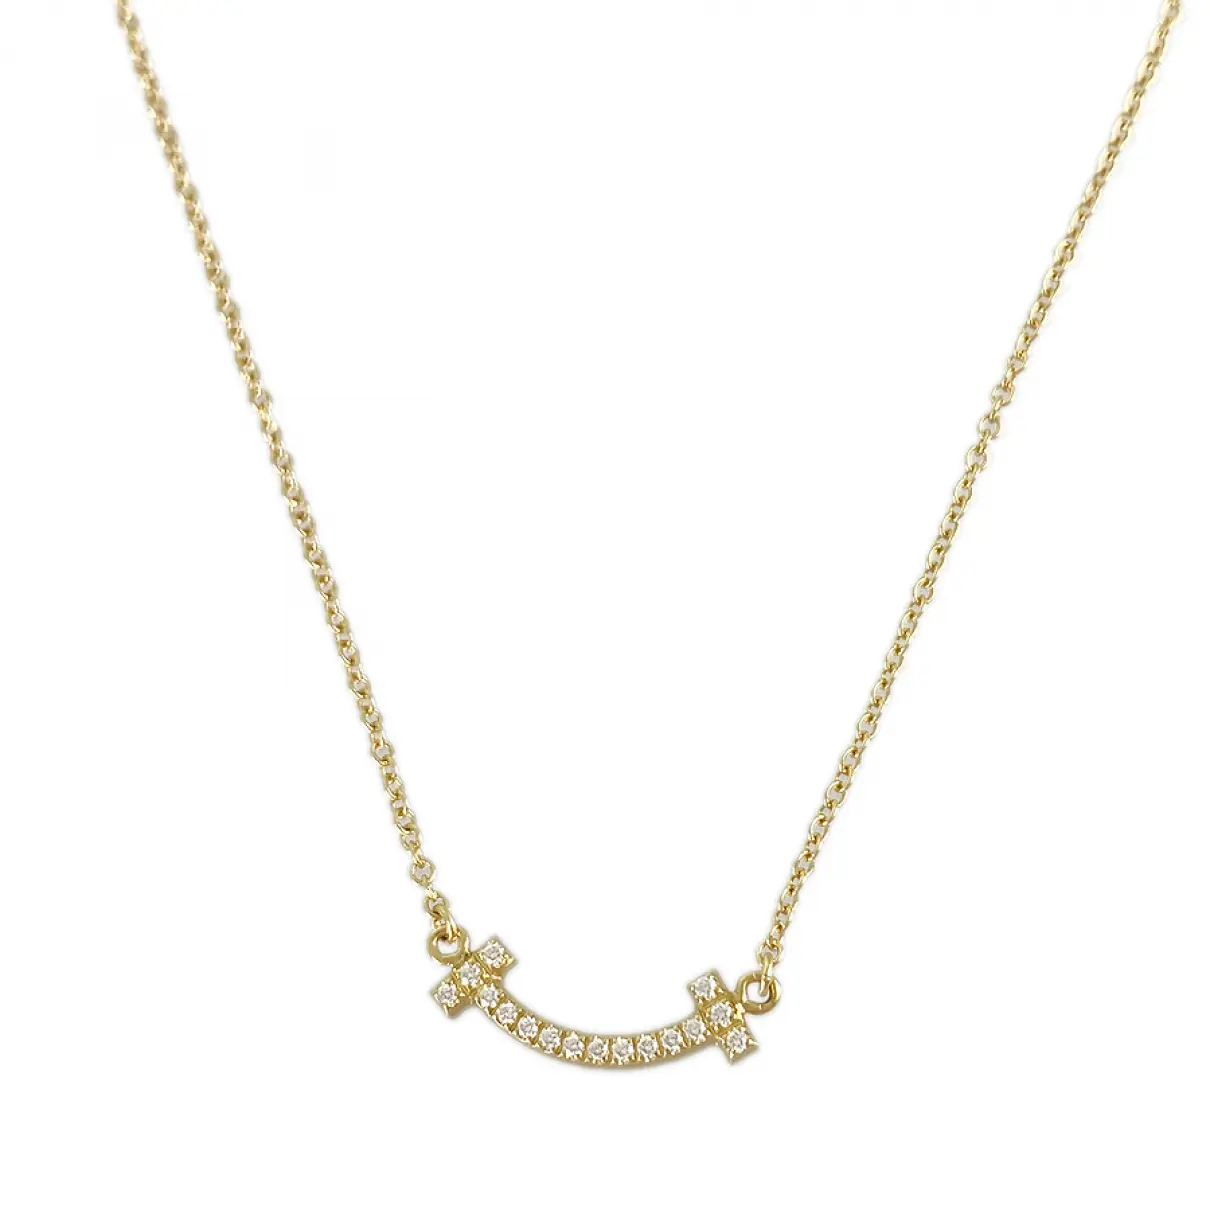 Buy Tiffany & Co Tiffany T yellow gold necklace online